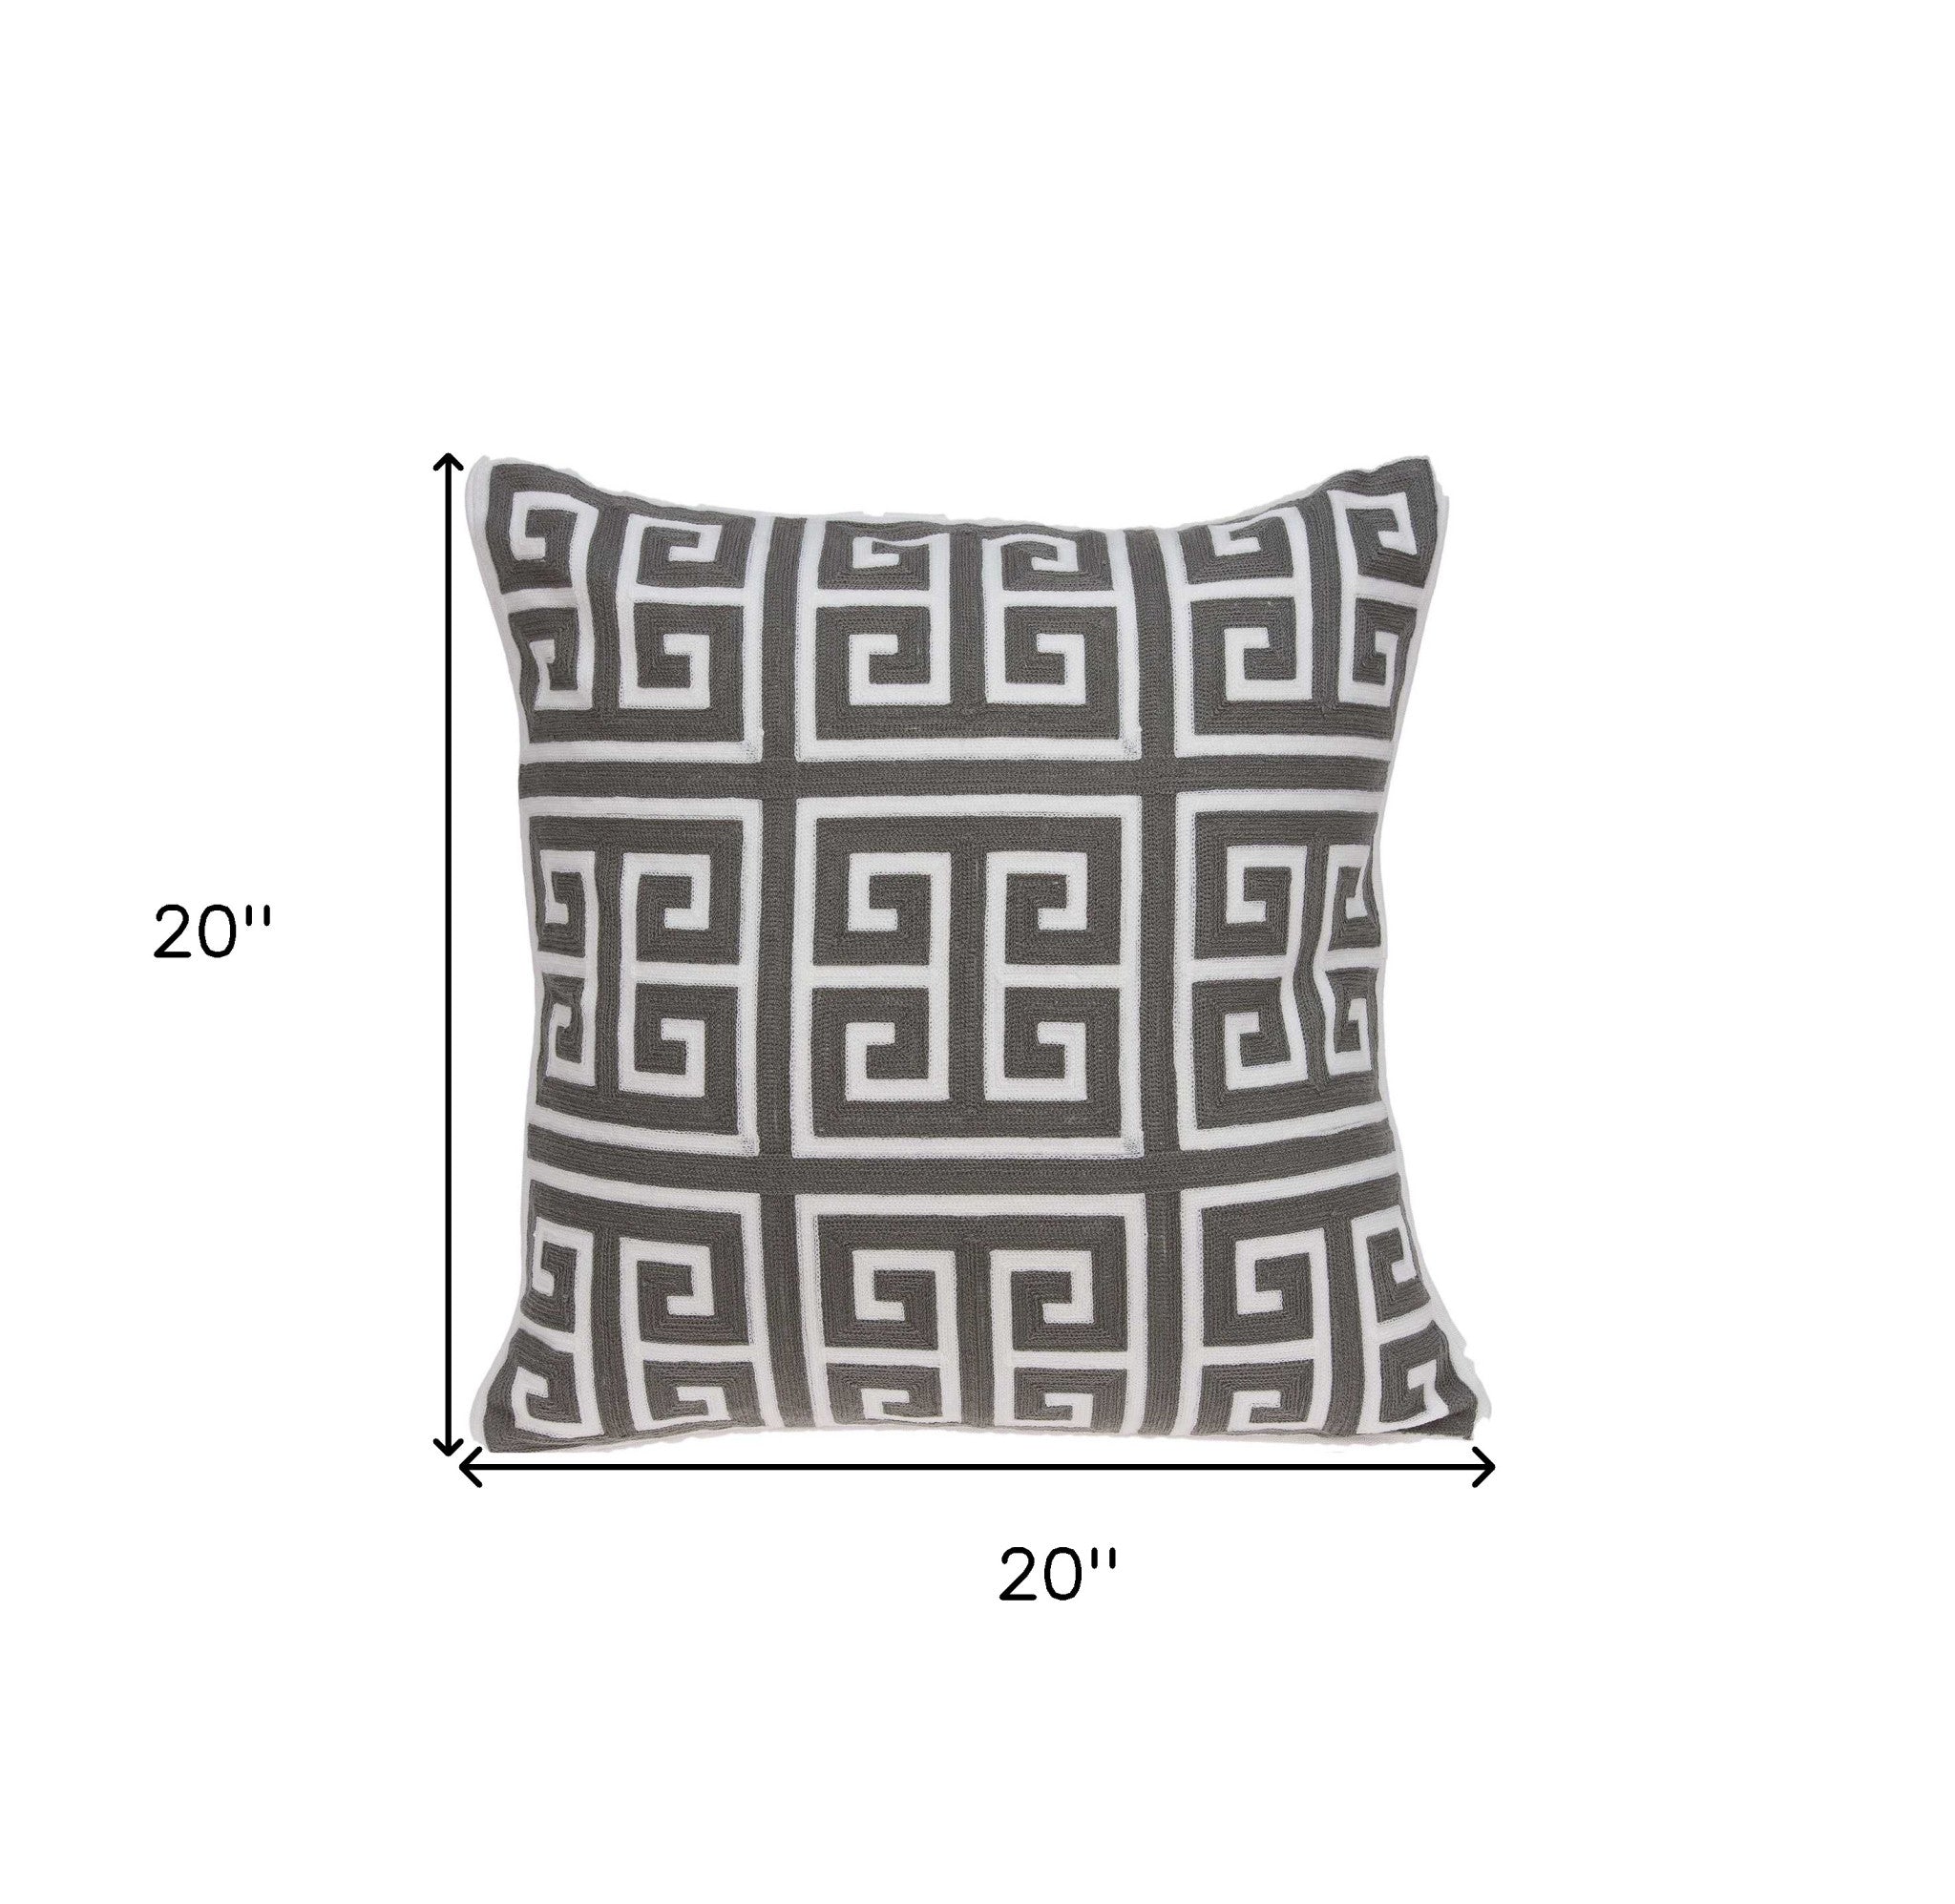 20" X 7" X 20" Cool Transitional Gray And White Pillow Cover With Poly Insert